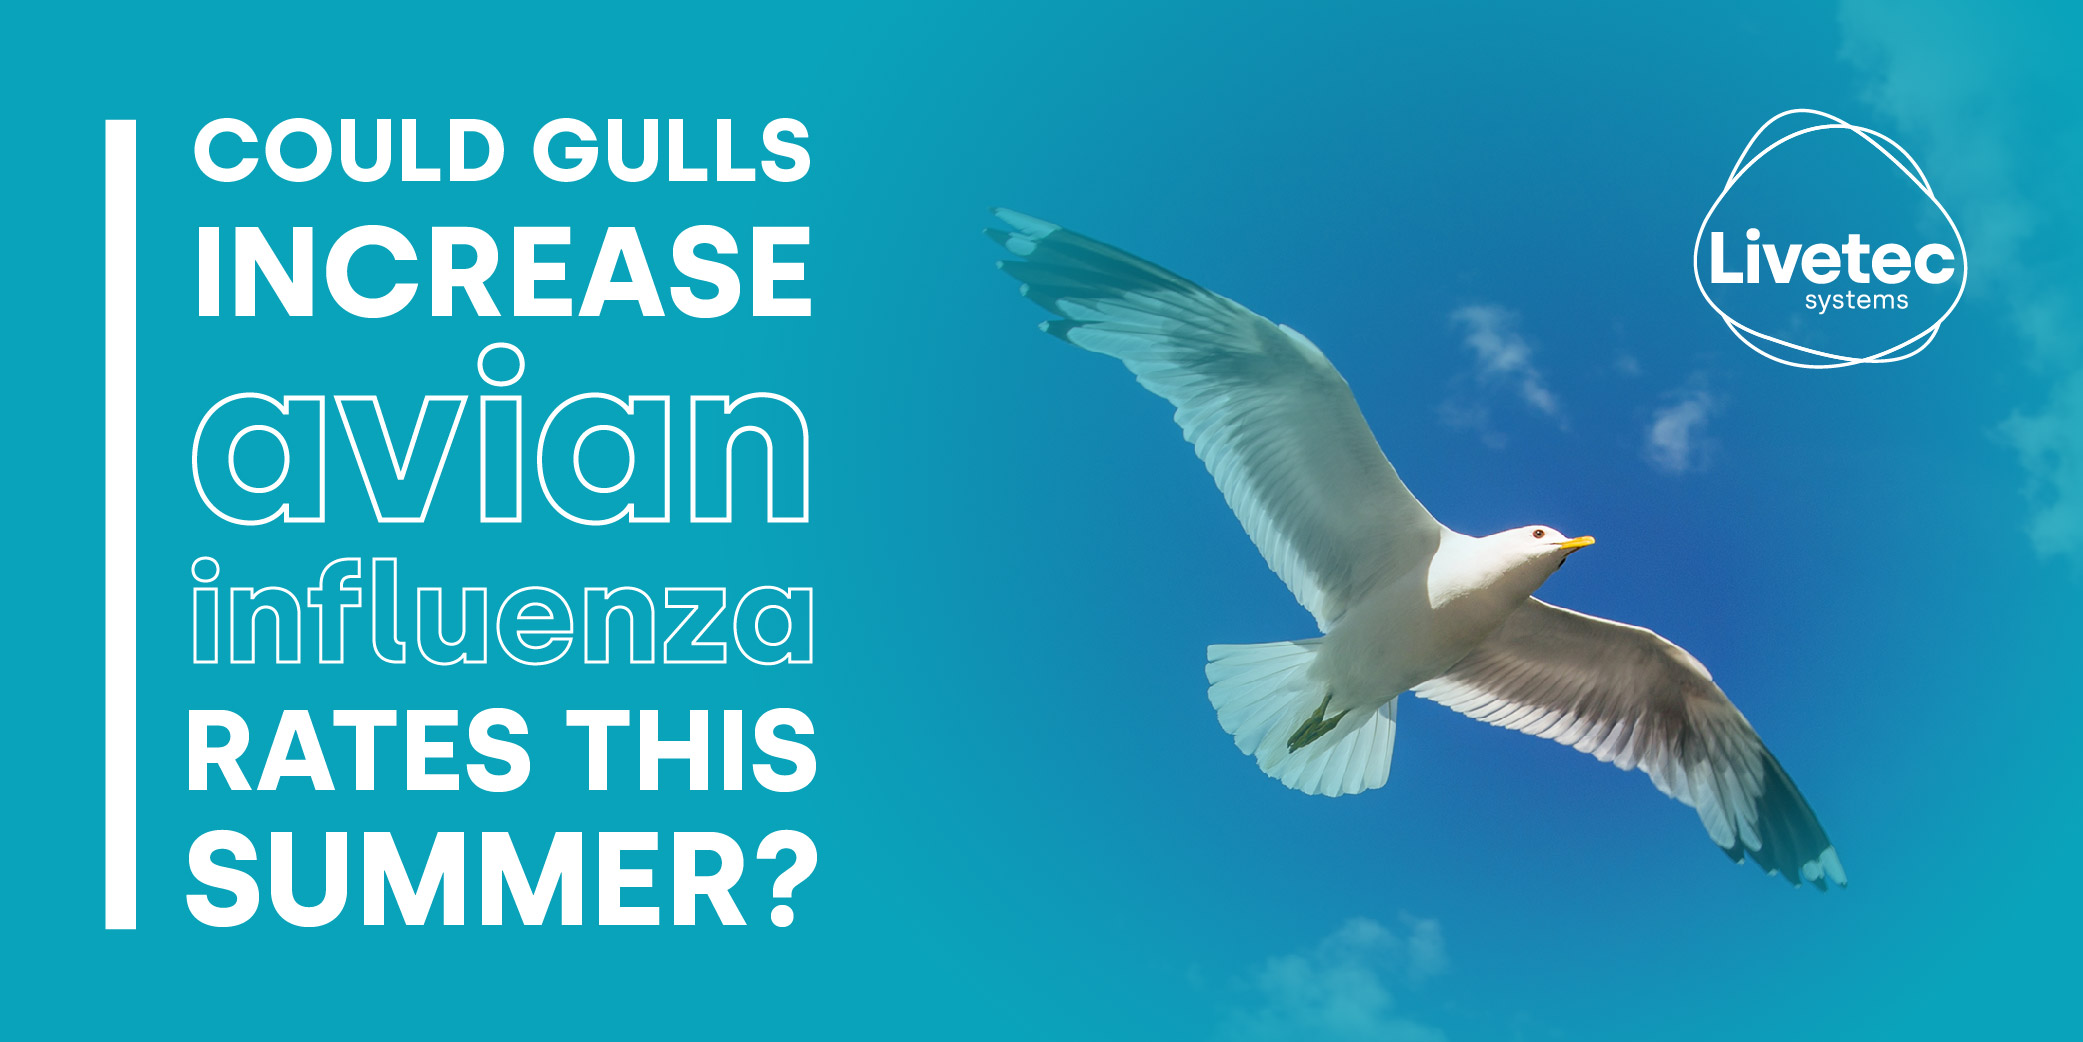 Could Gulls release avian influenza rates this summer?